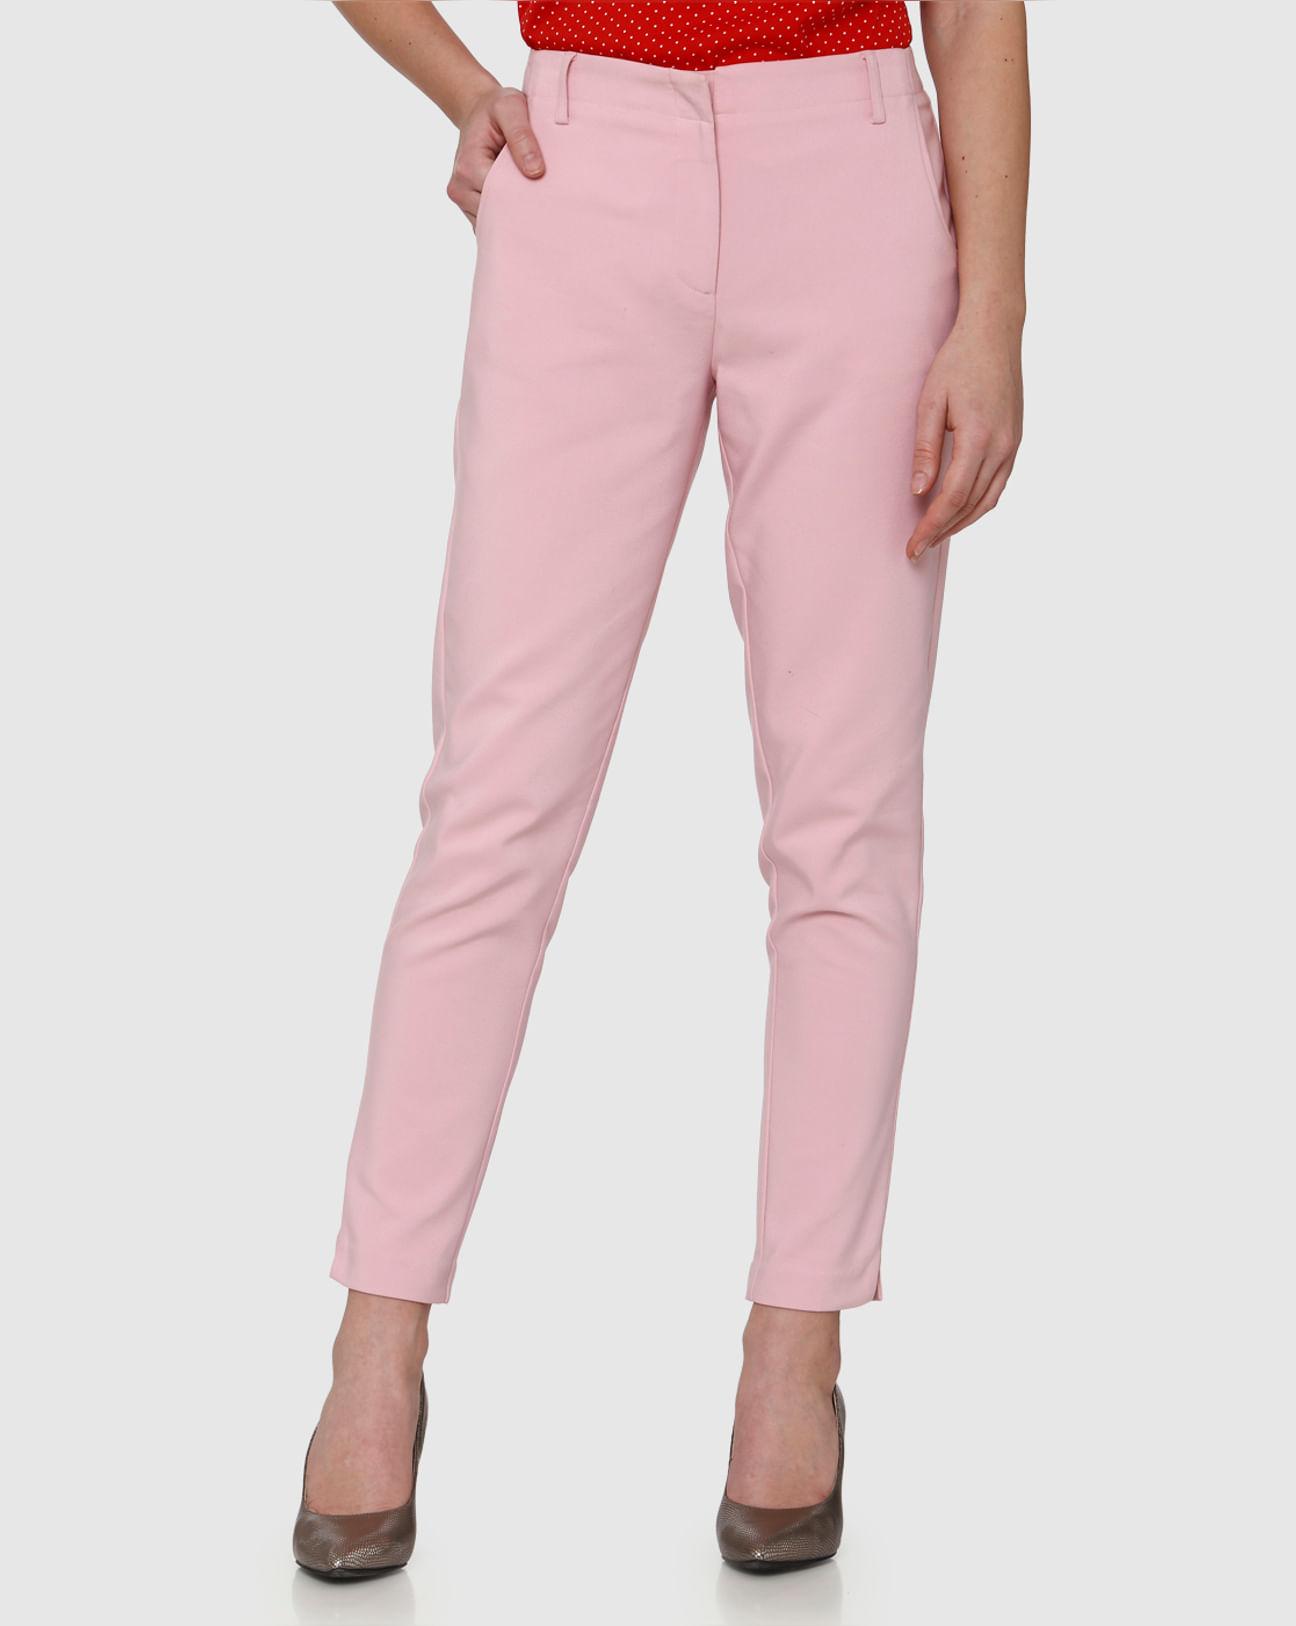 pink mid rise pants